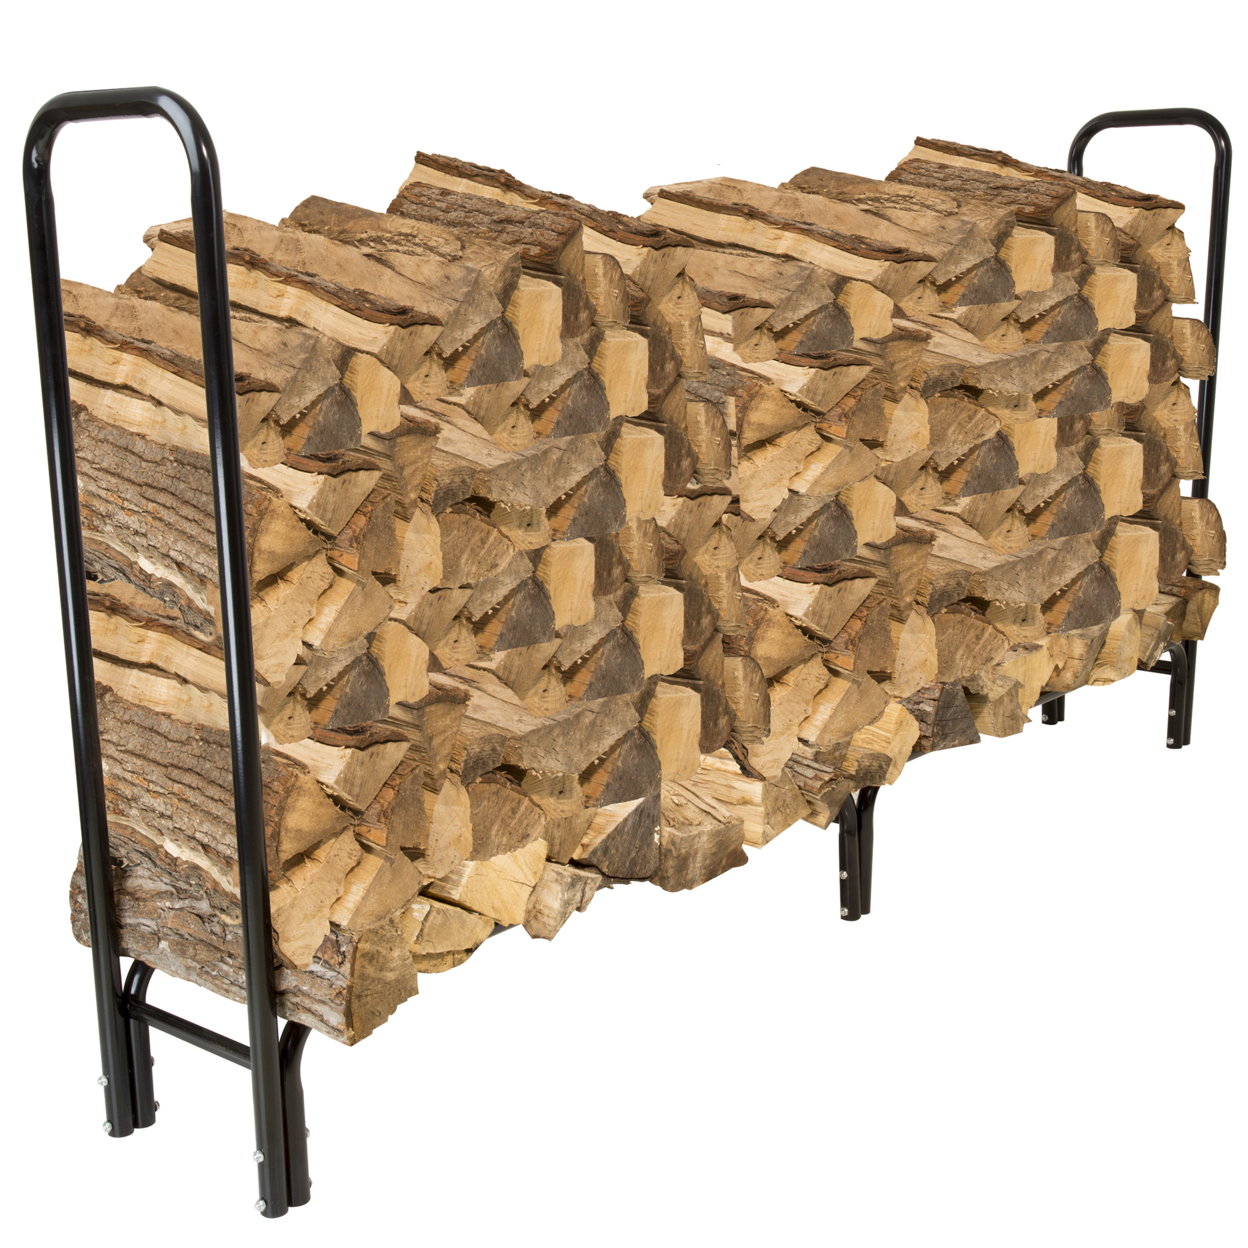 Pure Garden 8 Foot Firewood Log Rack With Cover